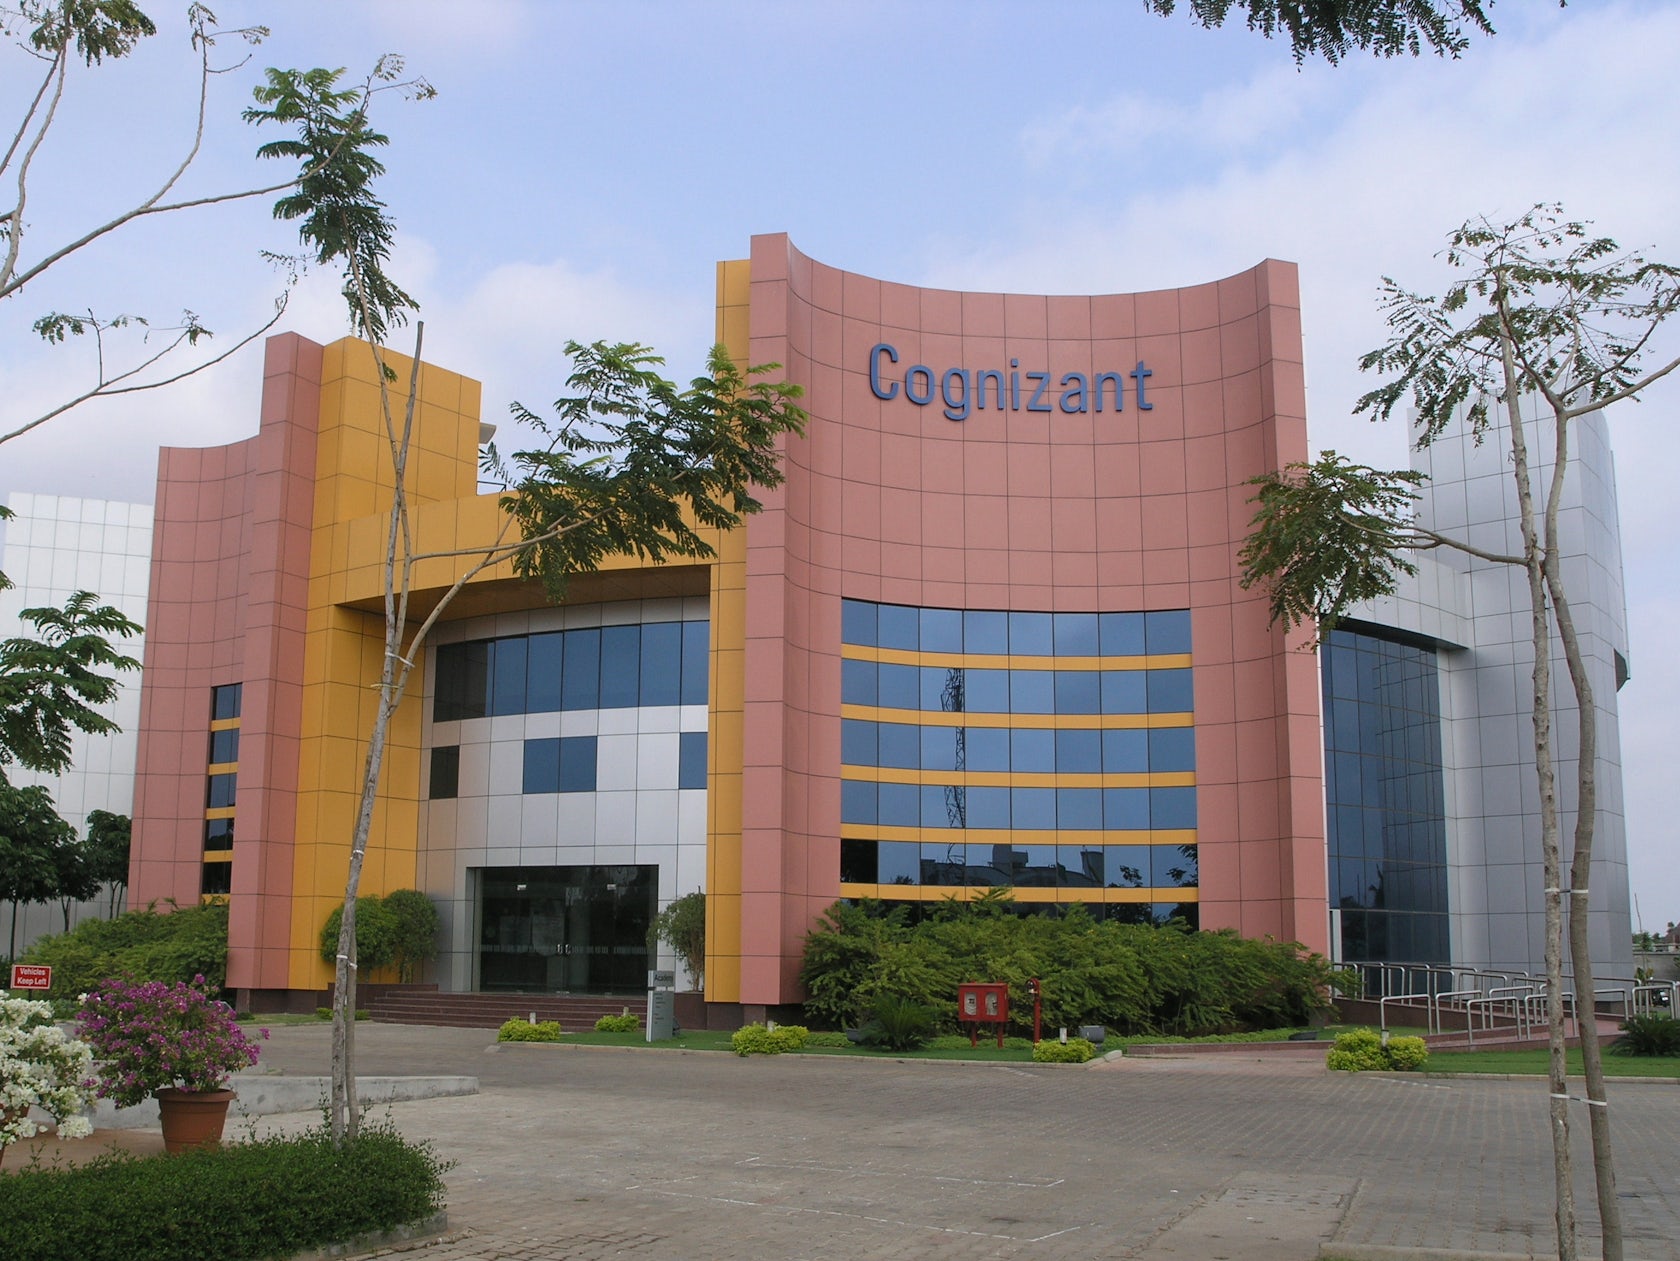 Cognizant main branch in chennai film complet 50 nuance plus sombre